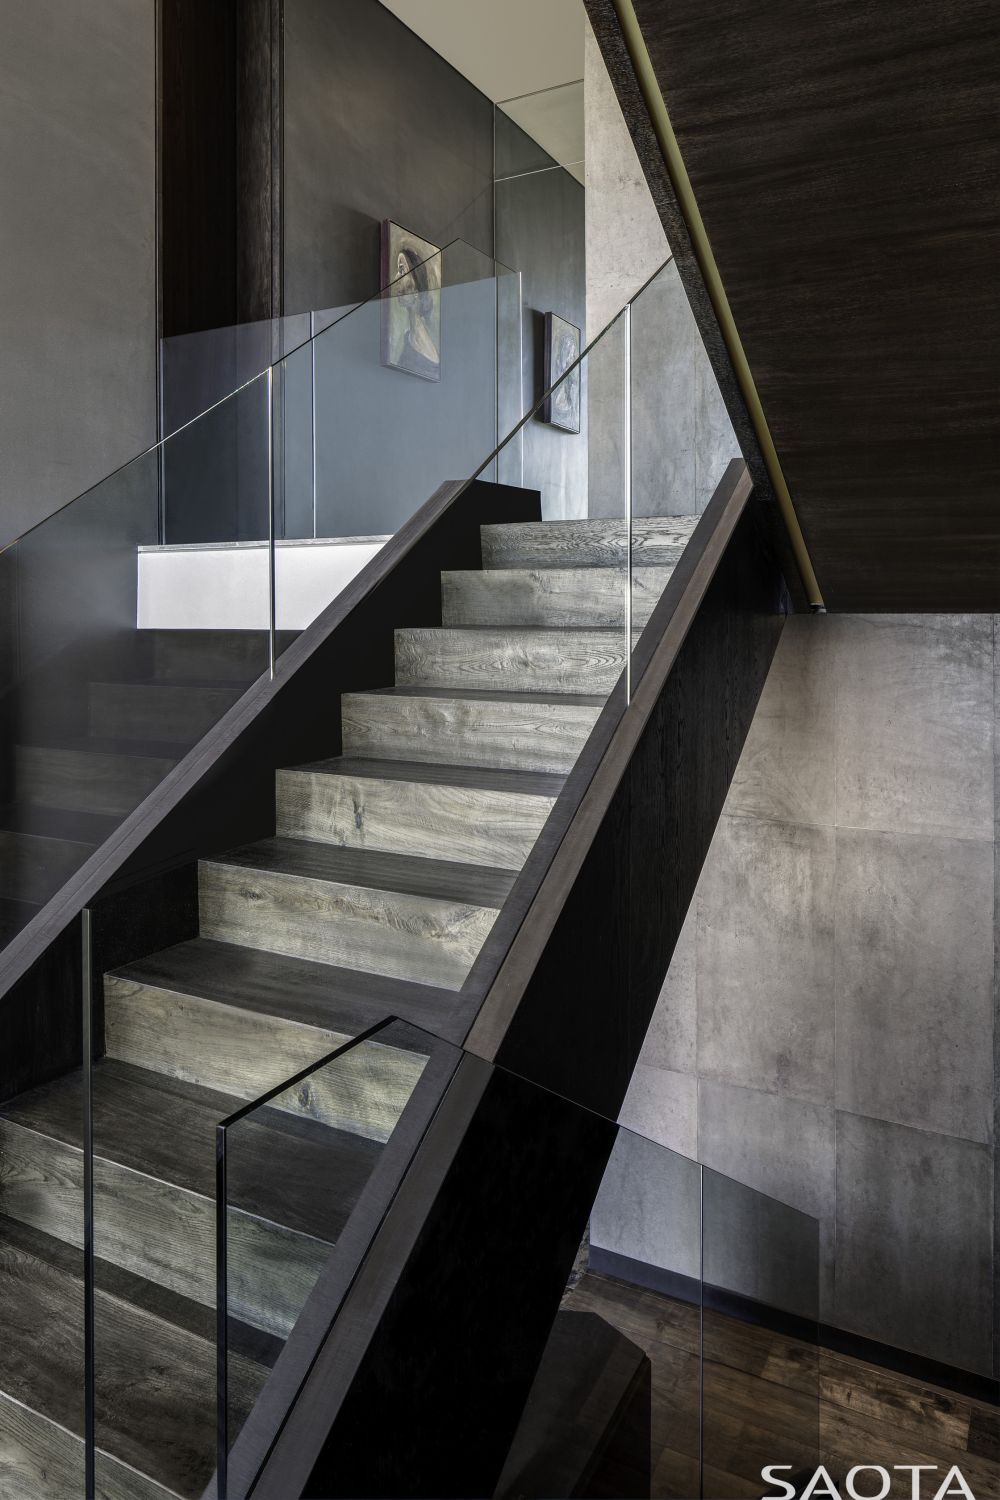 The timber staircase puts en emphasis on the natural beauty and grain of the wood